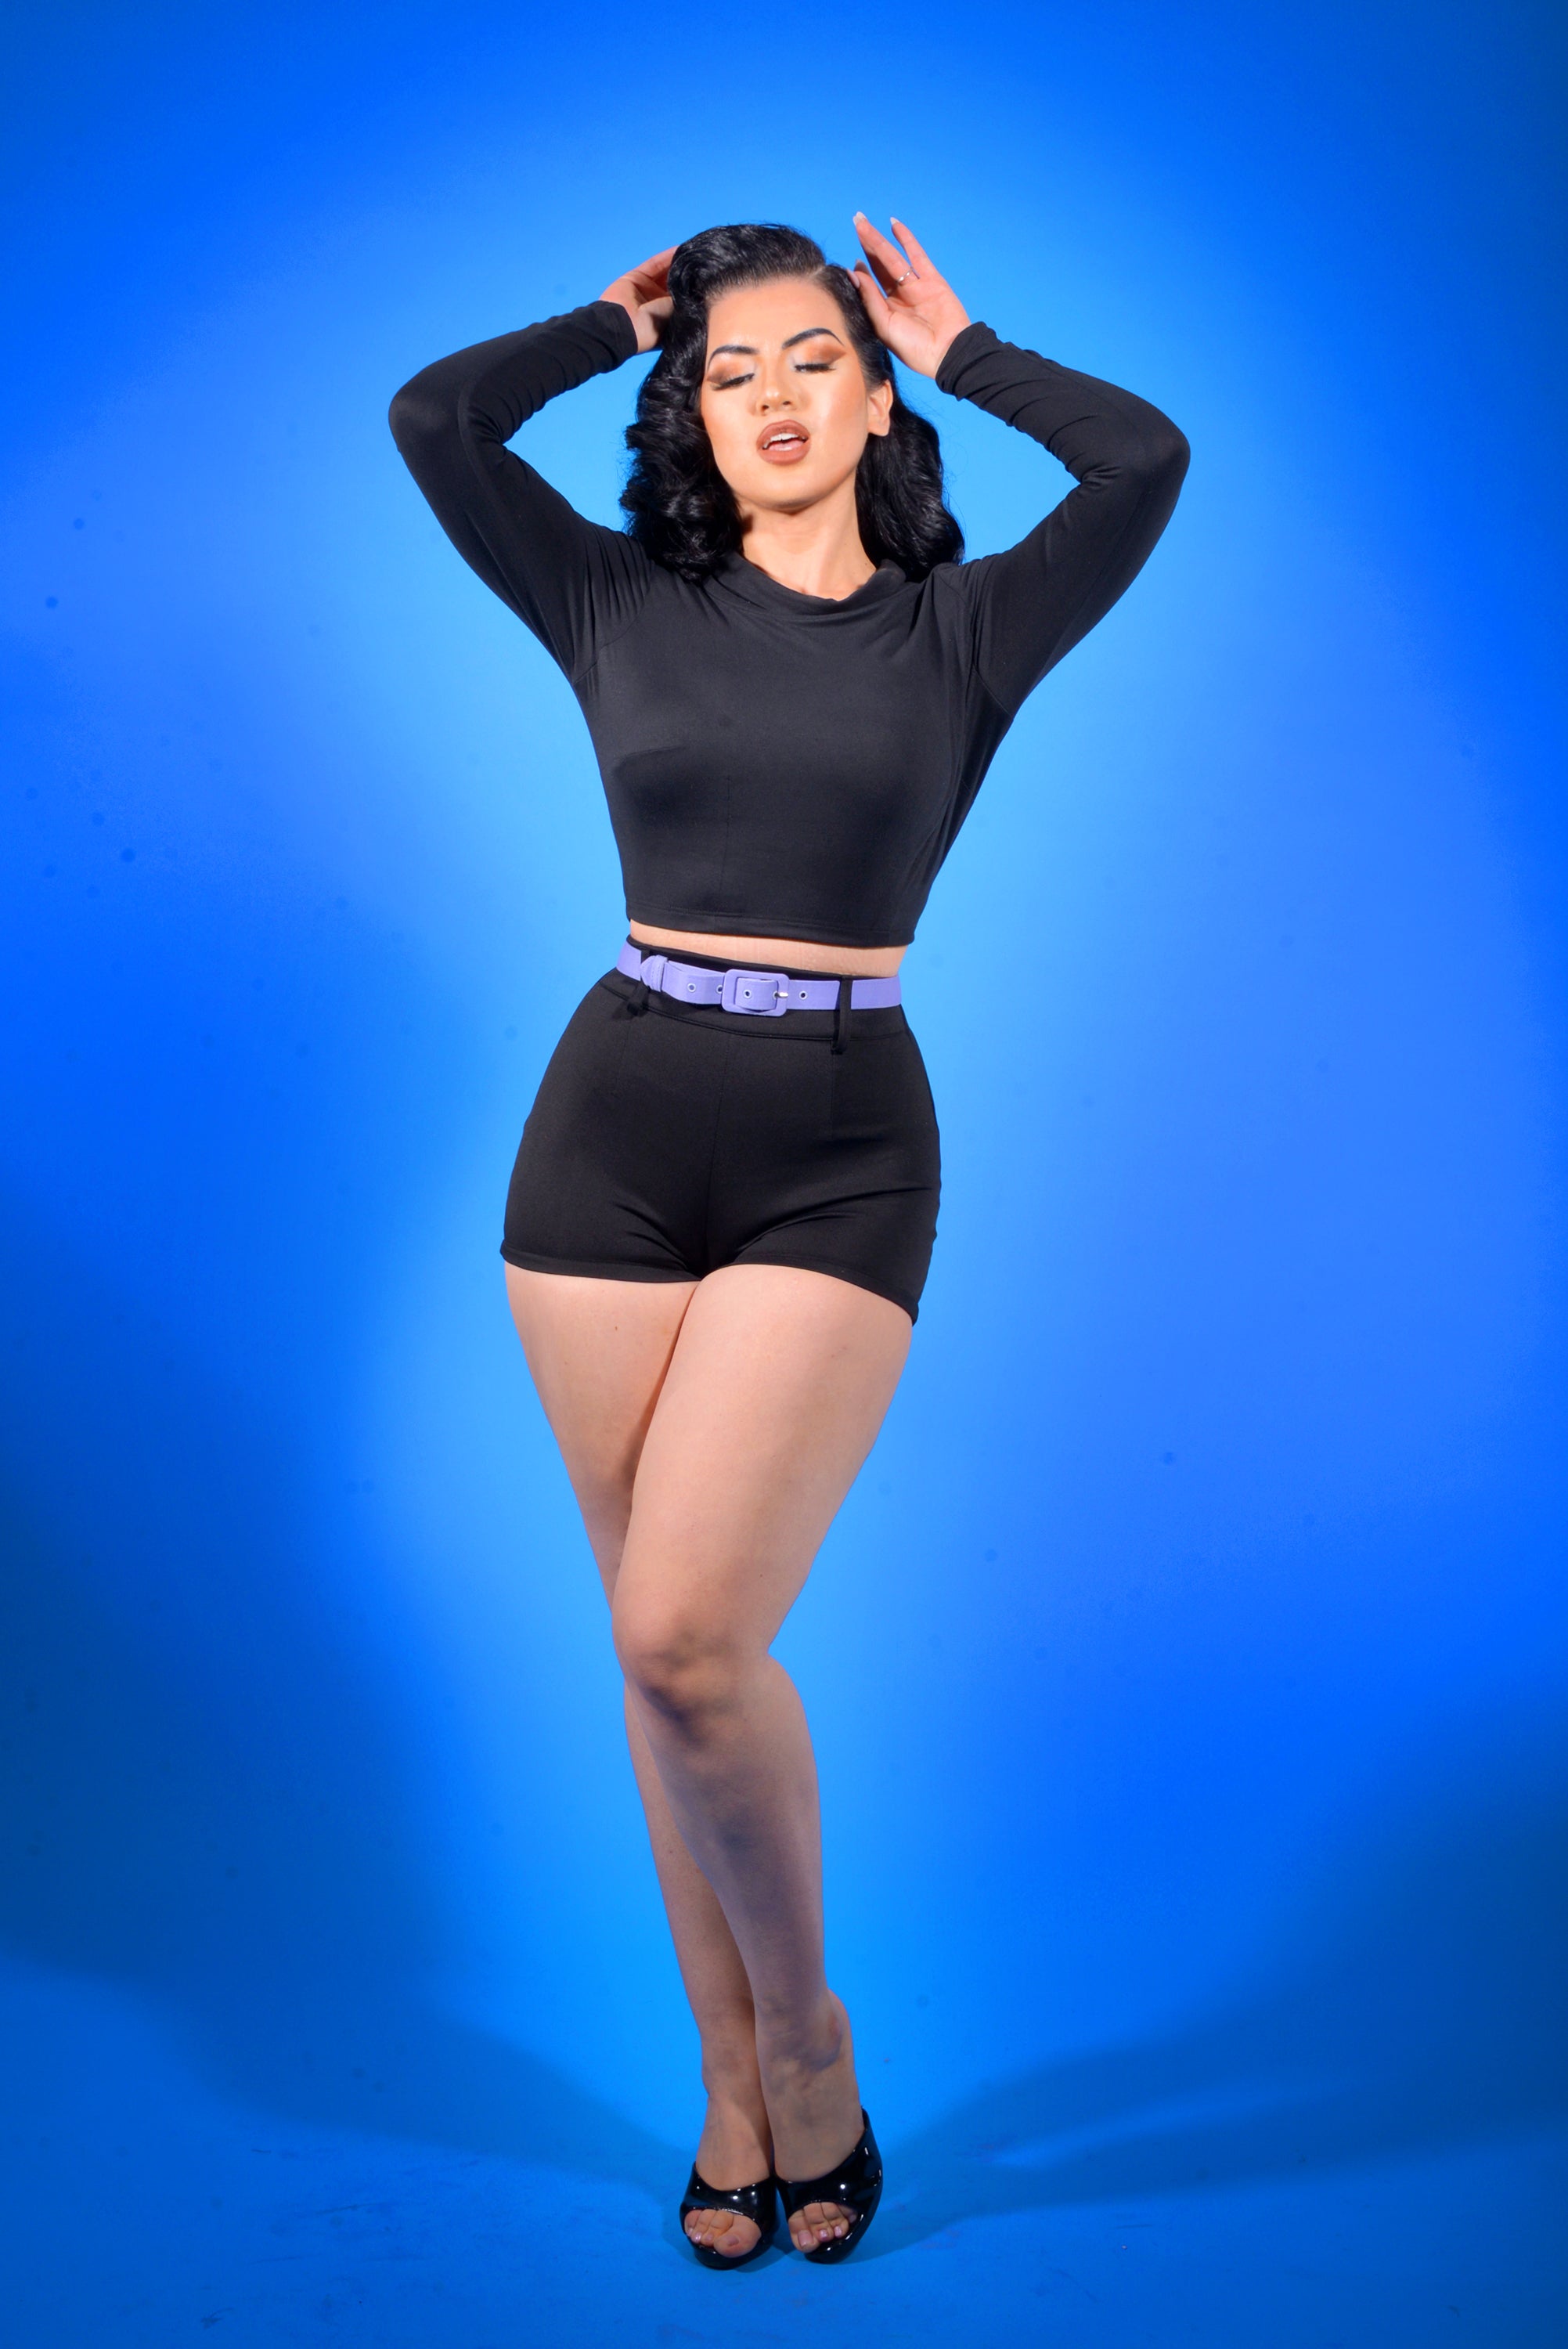 60's Bad Girl High Waist Belted Hot Pants in Solid Black | Traci Lords for Couture Body pinupgirlclothing.com